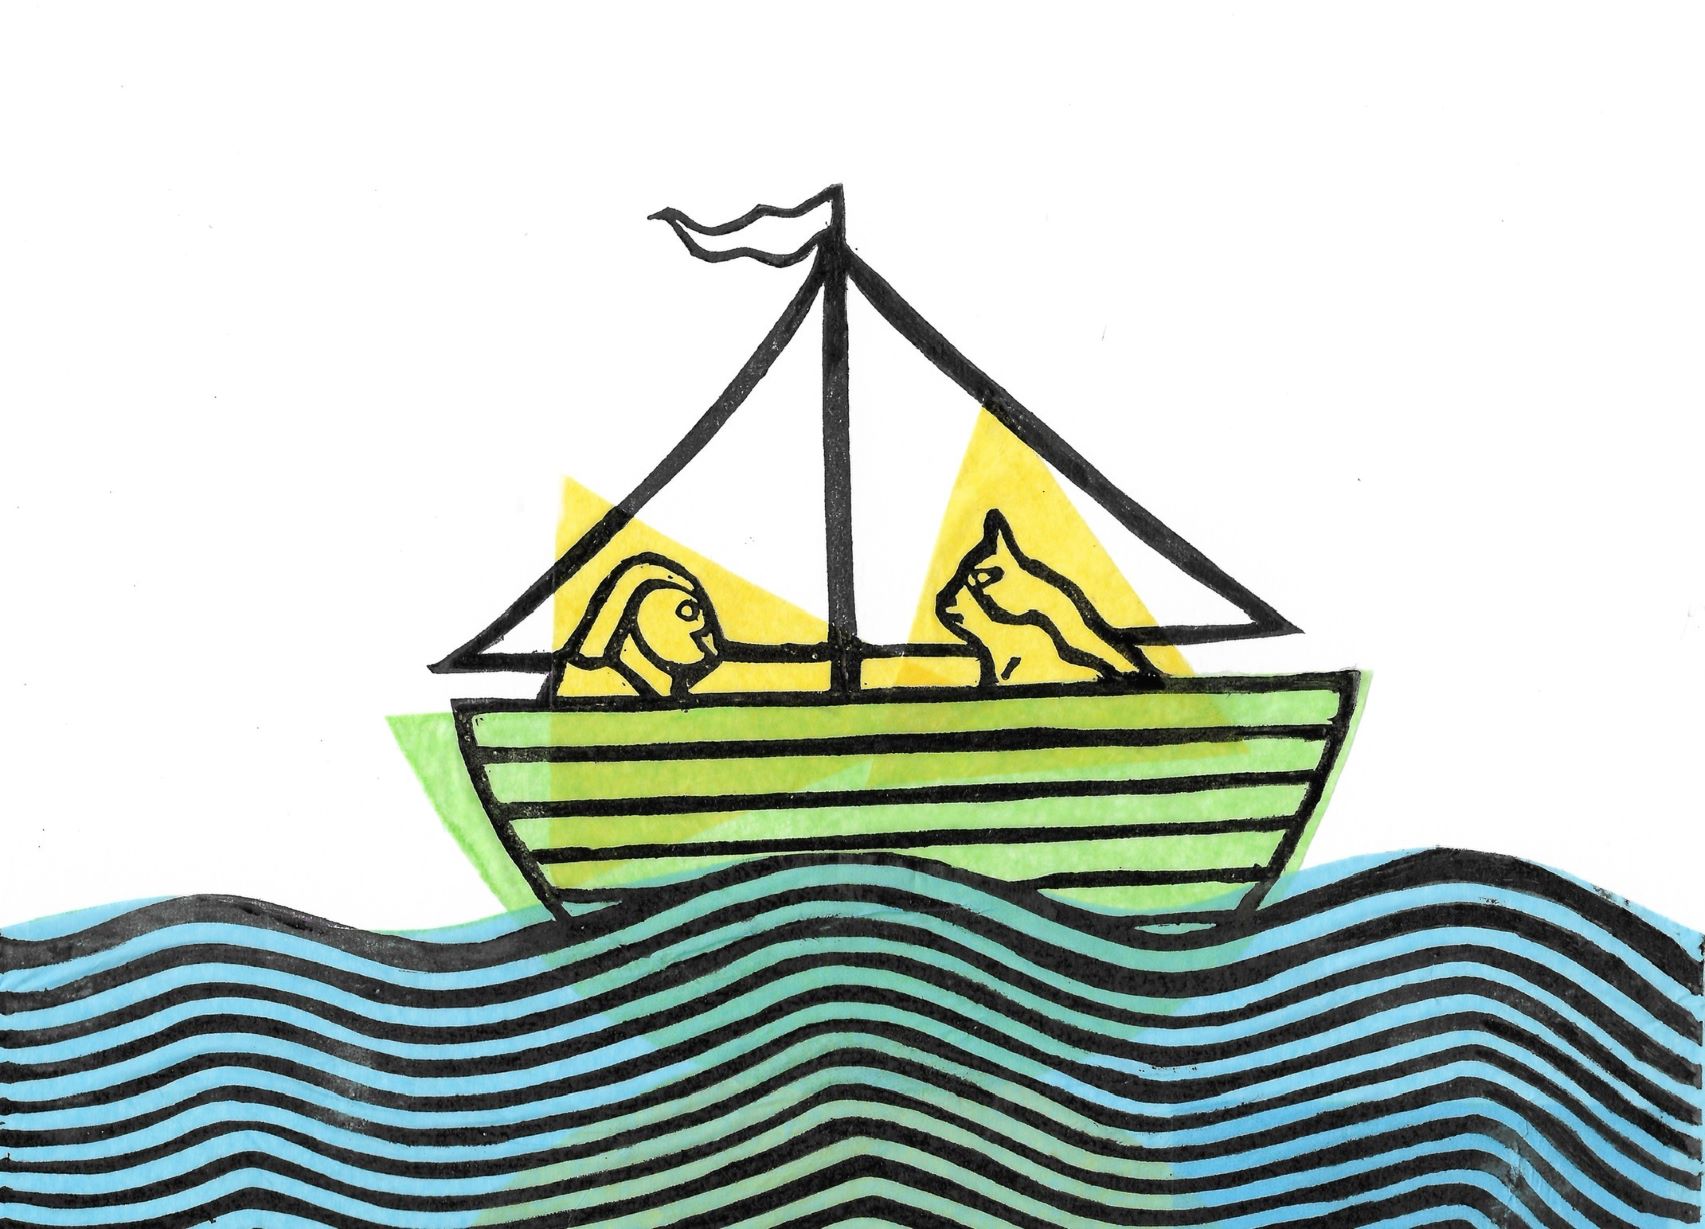 Linocut print for 'The Owl and the Pussycat' by Edward Lear. Created with bold lines to show the Owl and the Pussycat at sea on their row-boat, with hints of blue, green and yellow.